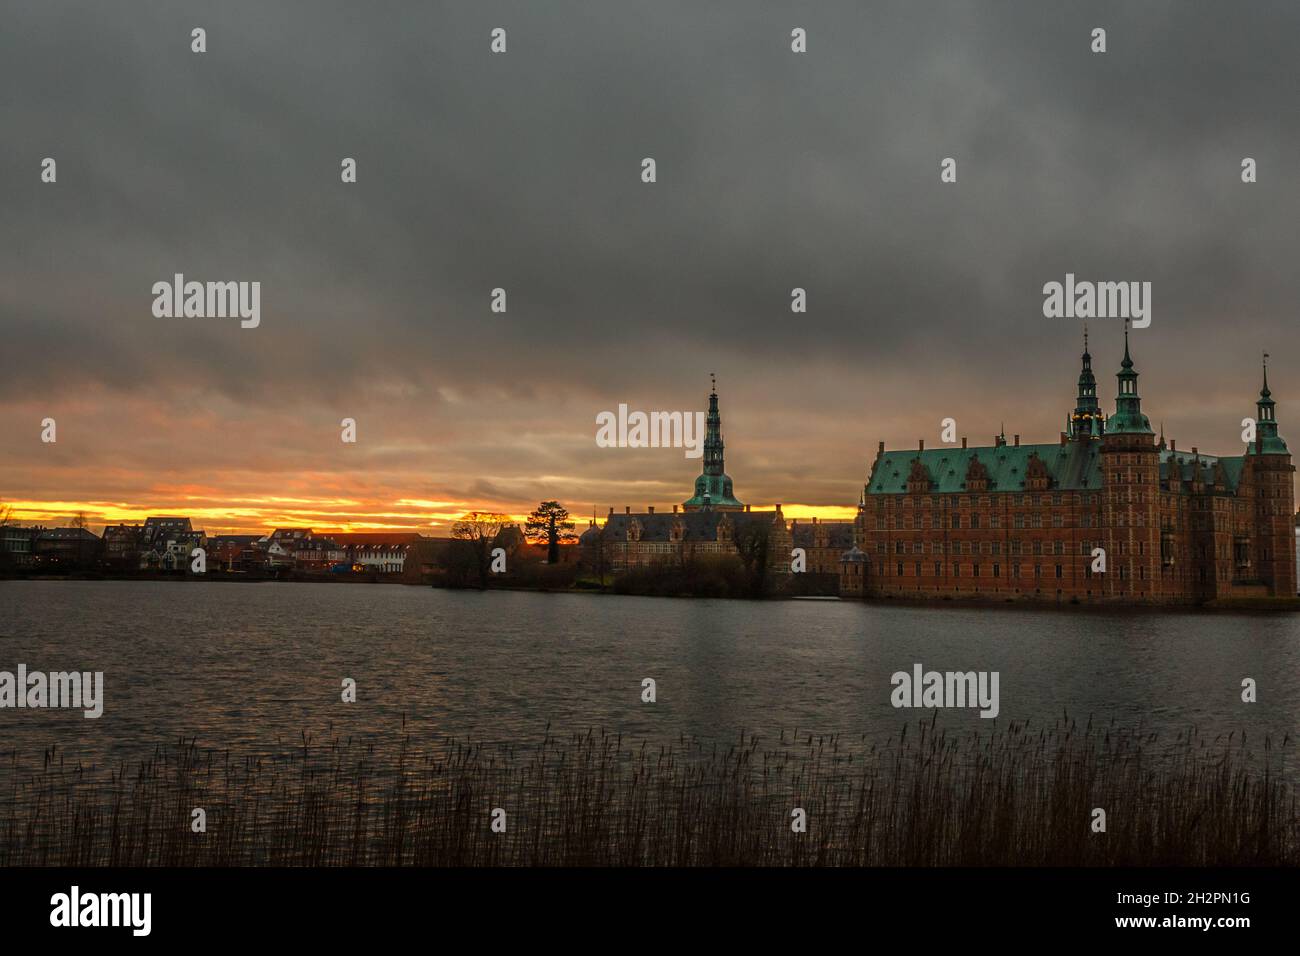 Frederiksborg castle on the sunset, with lake and tree in the foreground, Hillerod, Denmark Stock Photo